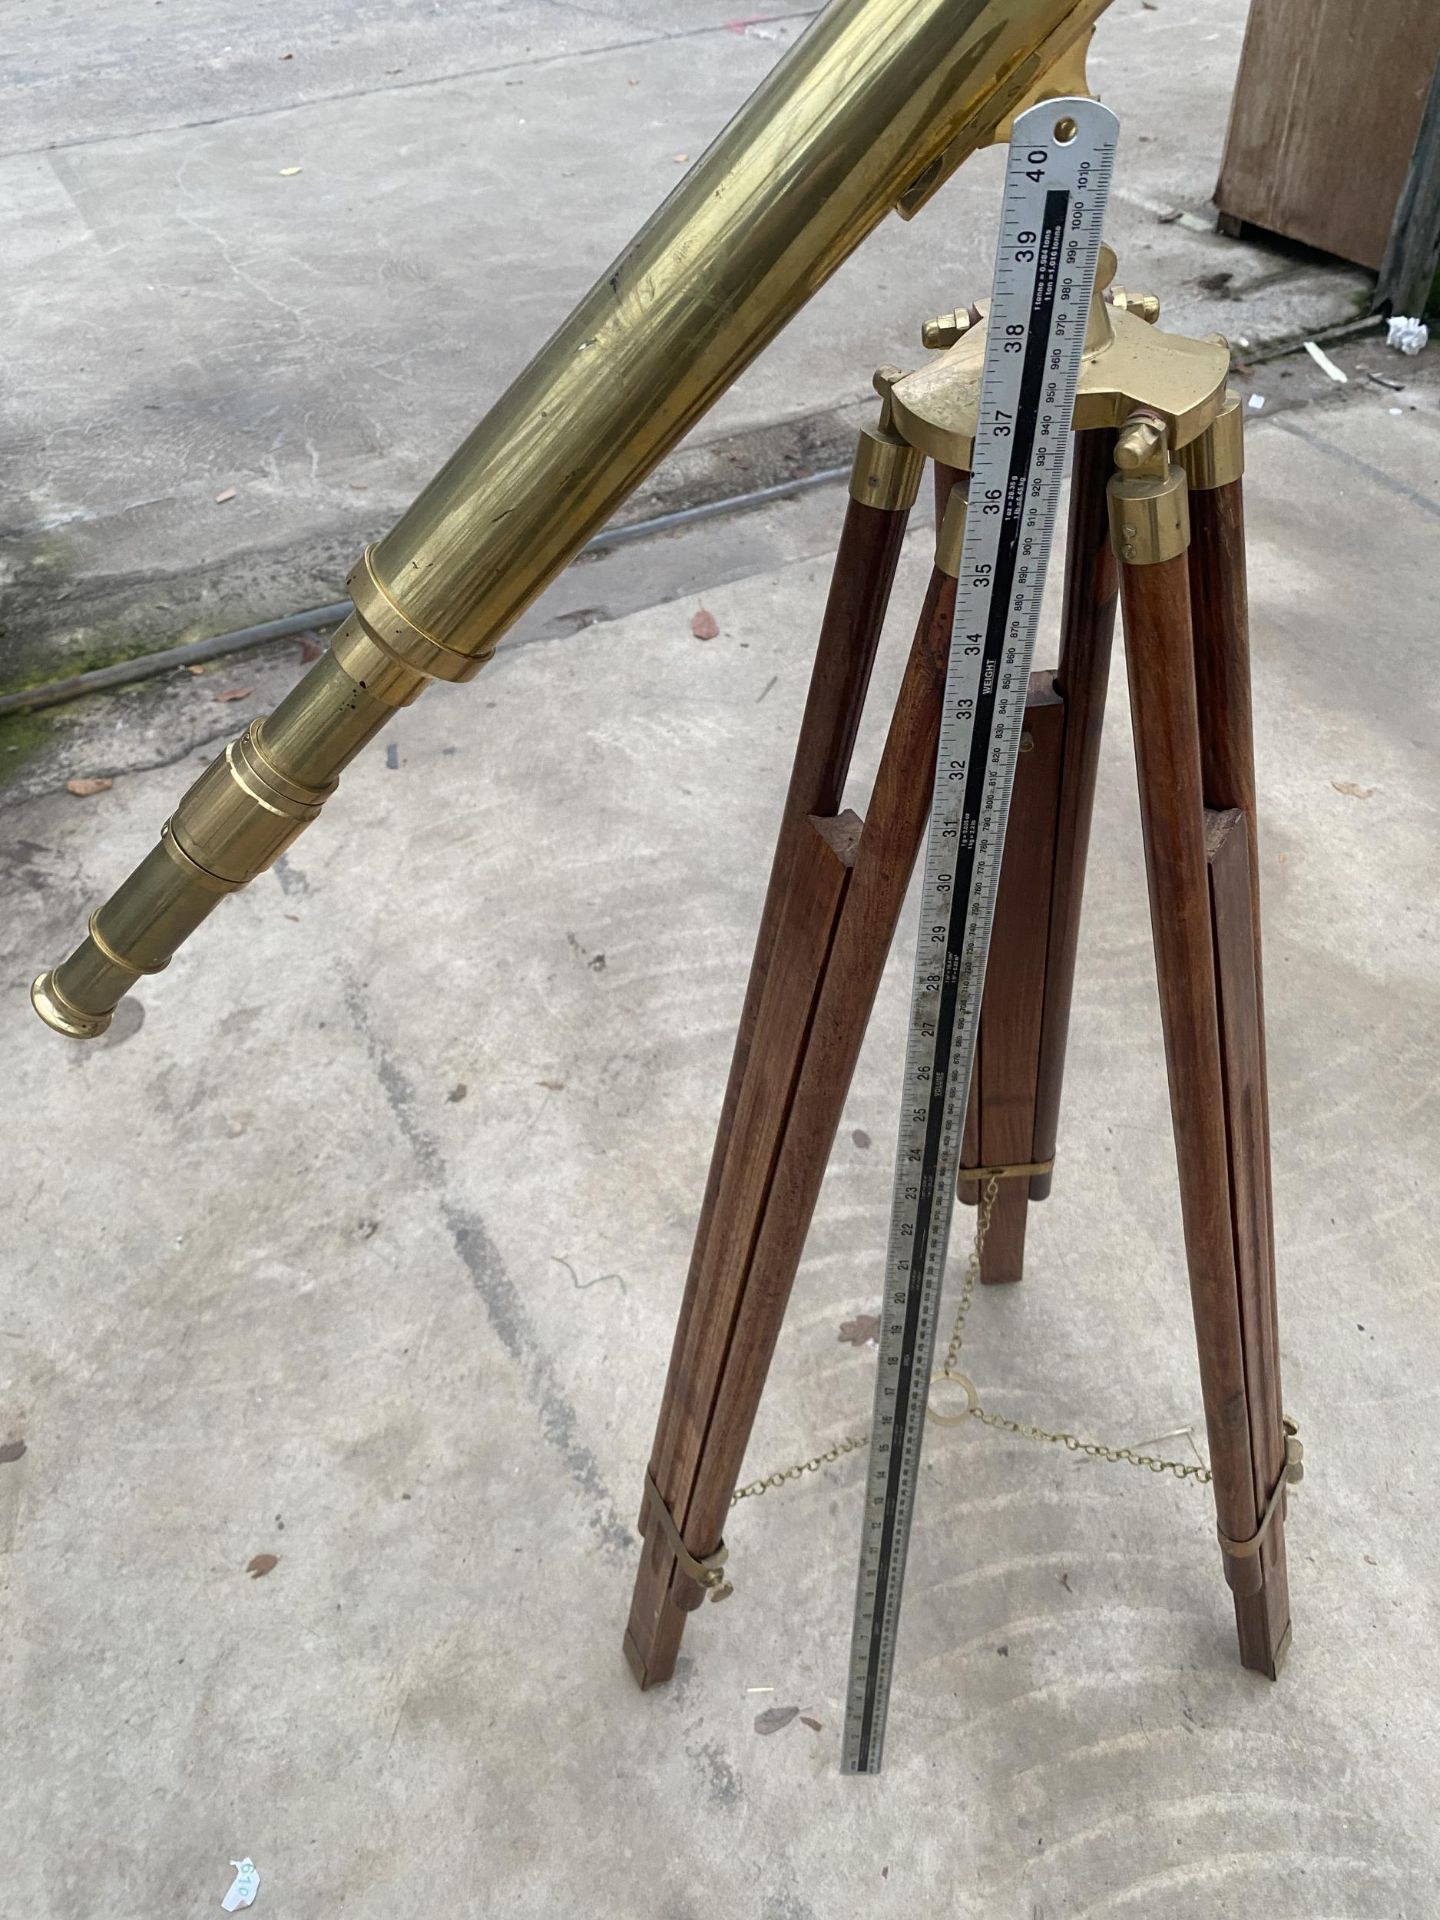 A VINTAGE BRASS TELESCOPE WITH WOODEN TRIPOD STAND - Image 3 of 5